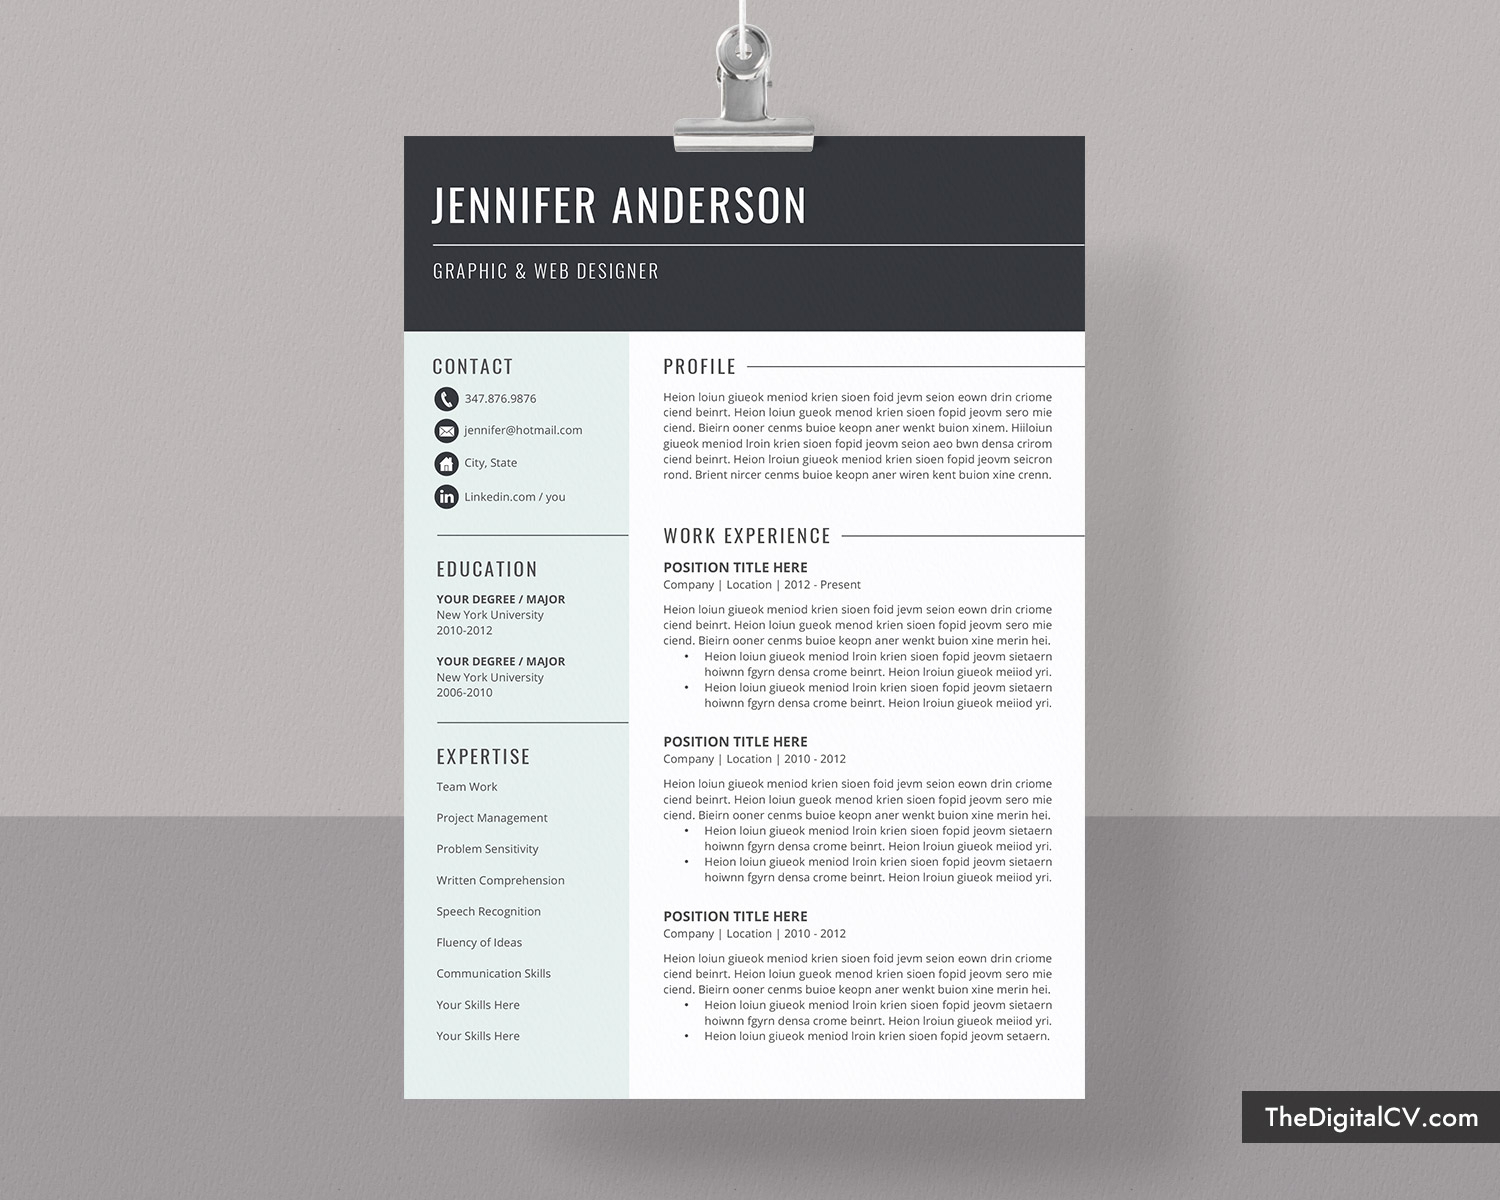 Basic And Simple Resume Template 2020 2021, Cv Template, Cover Letter,  Microsoft Word Resume Template, 1 3 Page, Modern Resume, Creative Resume, With Regard To How To Make A Cv Template On Microsoft Word